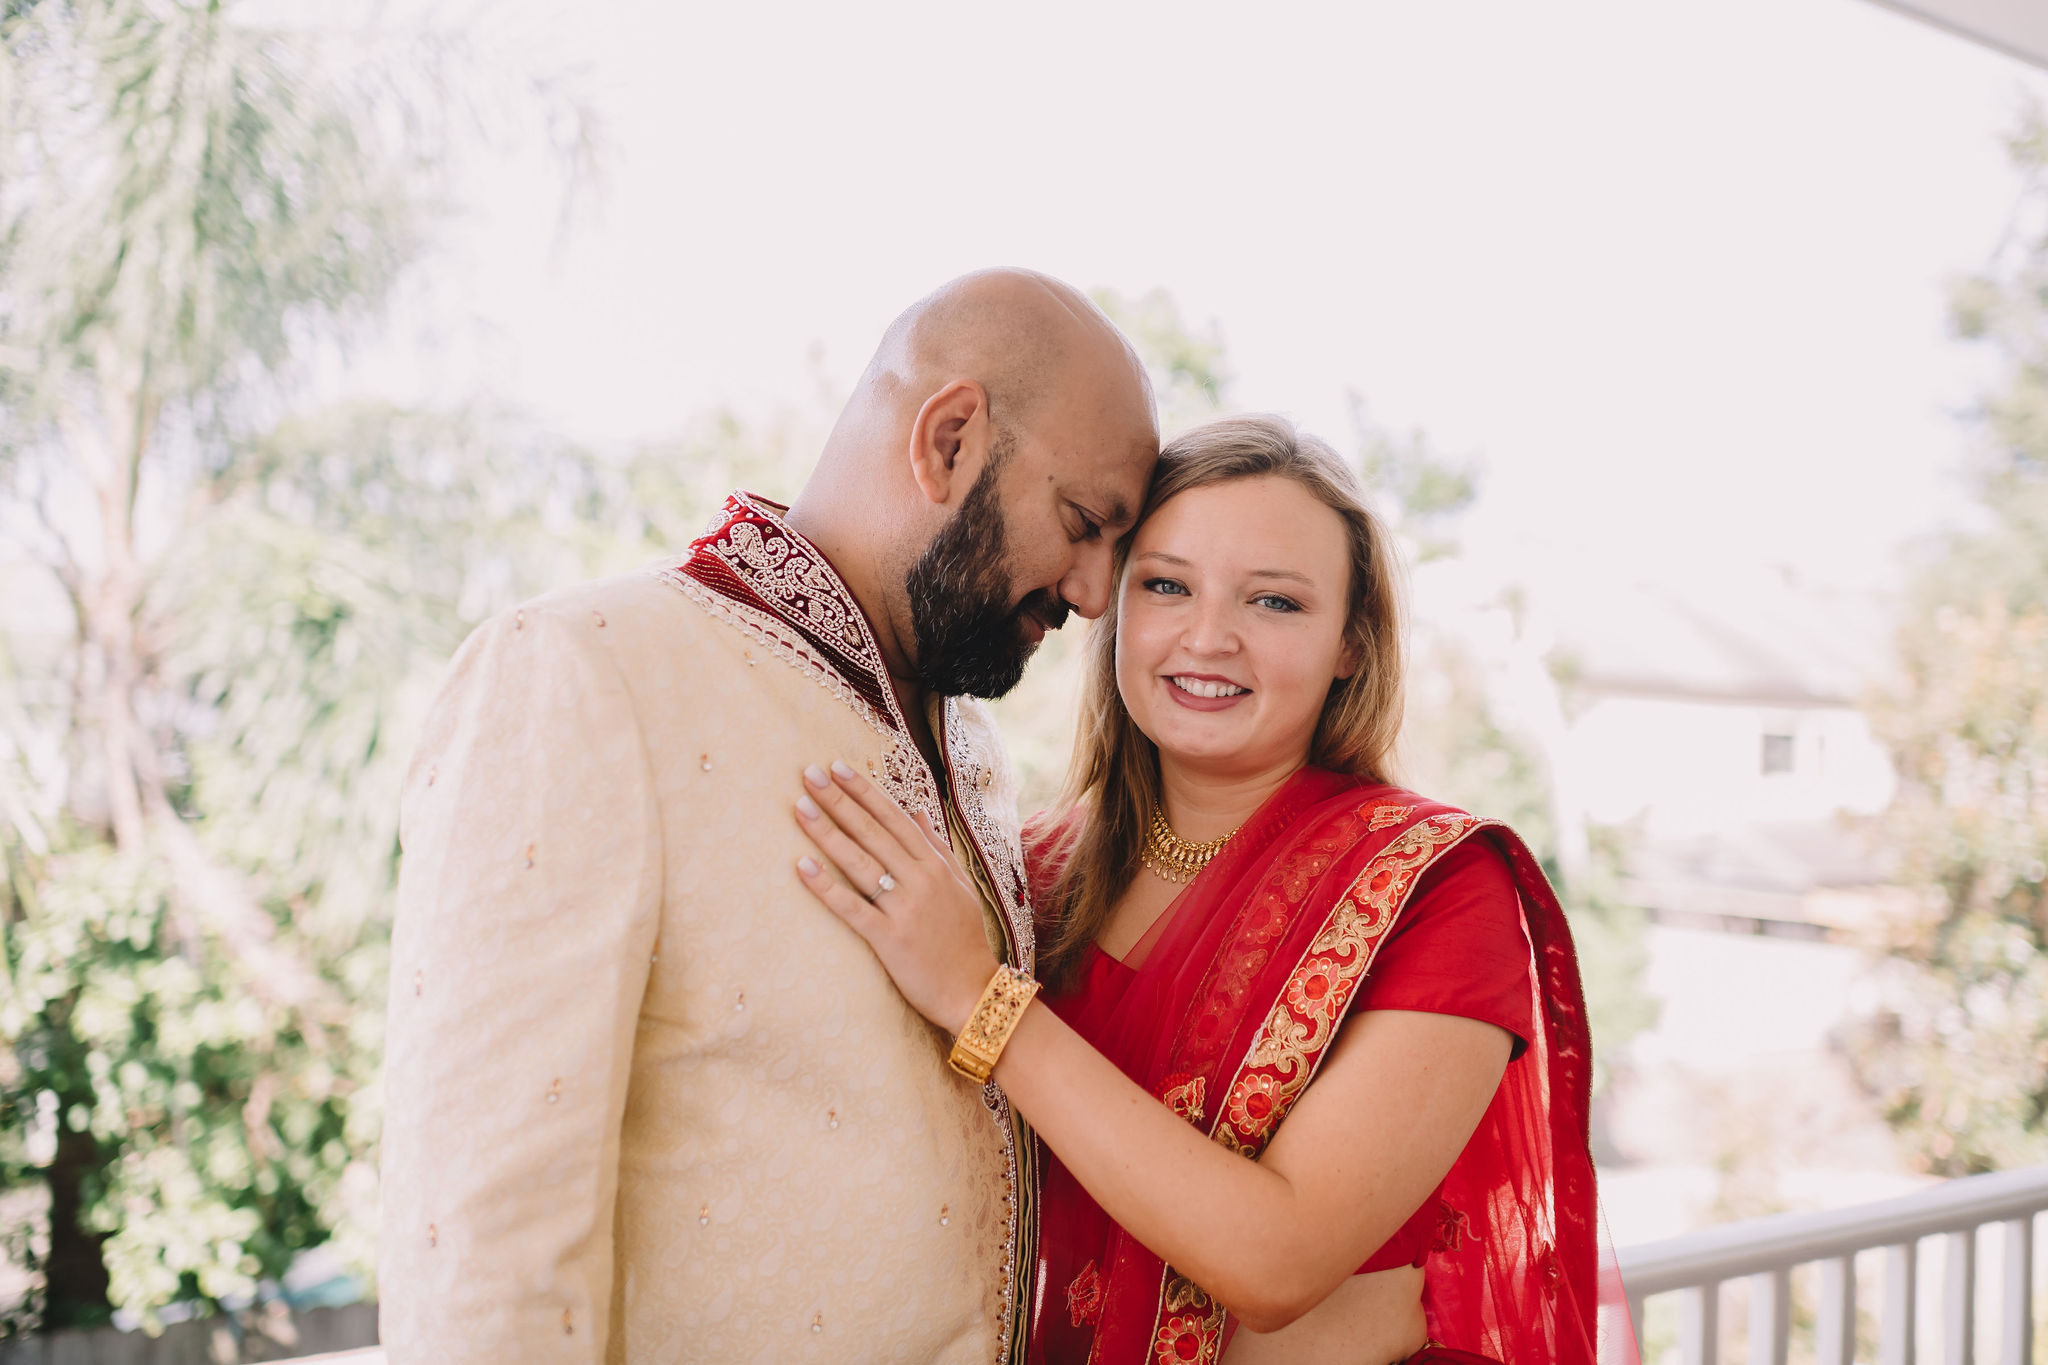 Rachel and Jimmy's wedding weekend included a Mehndi Party. For this event, Rachel wore a traditional Lehenga in red and gold and Jimmy wore a Sherwani with red embroidered detail.